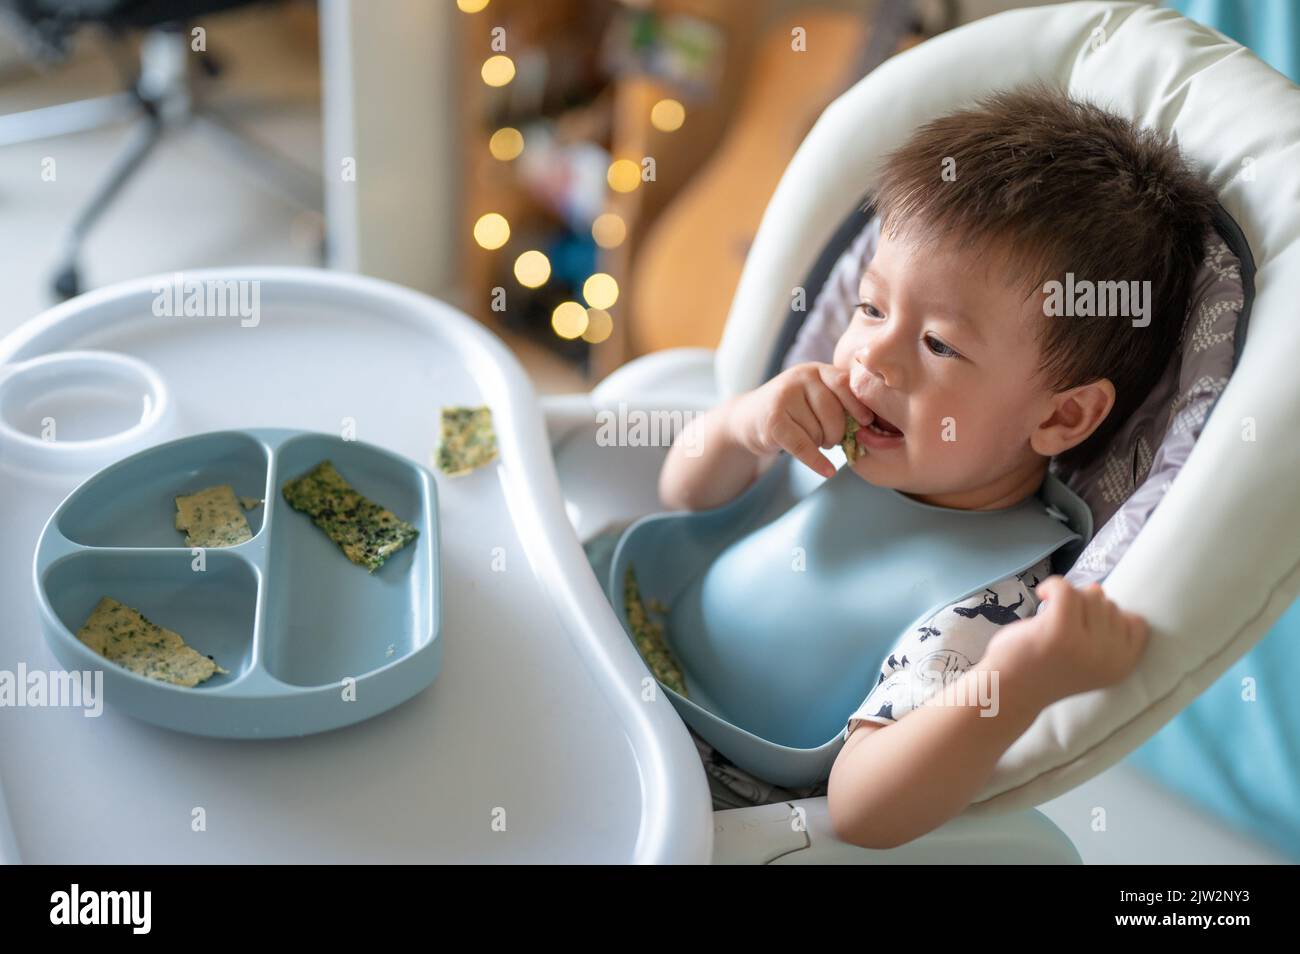 Baby boy eating by himself in his high chair at home. Adorable one year old baby having a meal holding food in his hands and eating at home Stock Photo